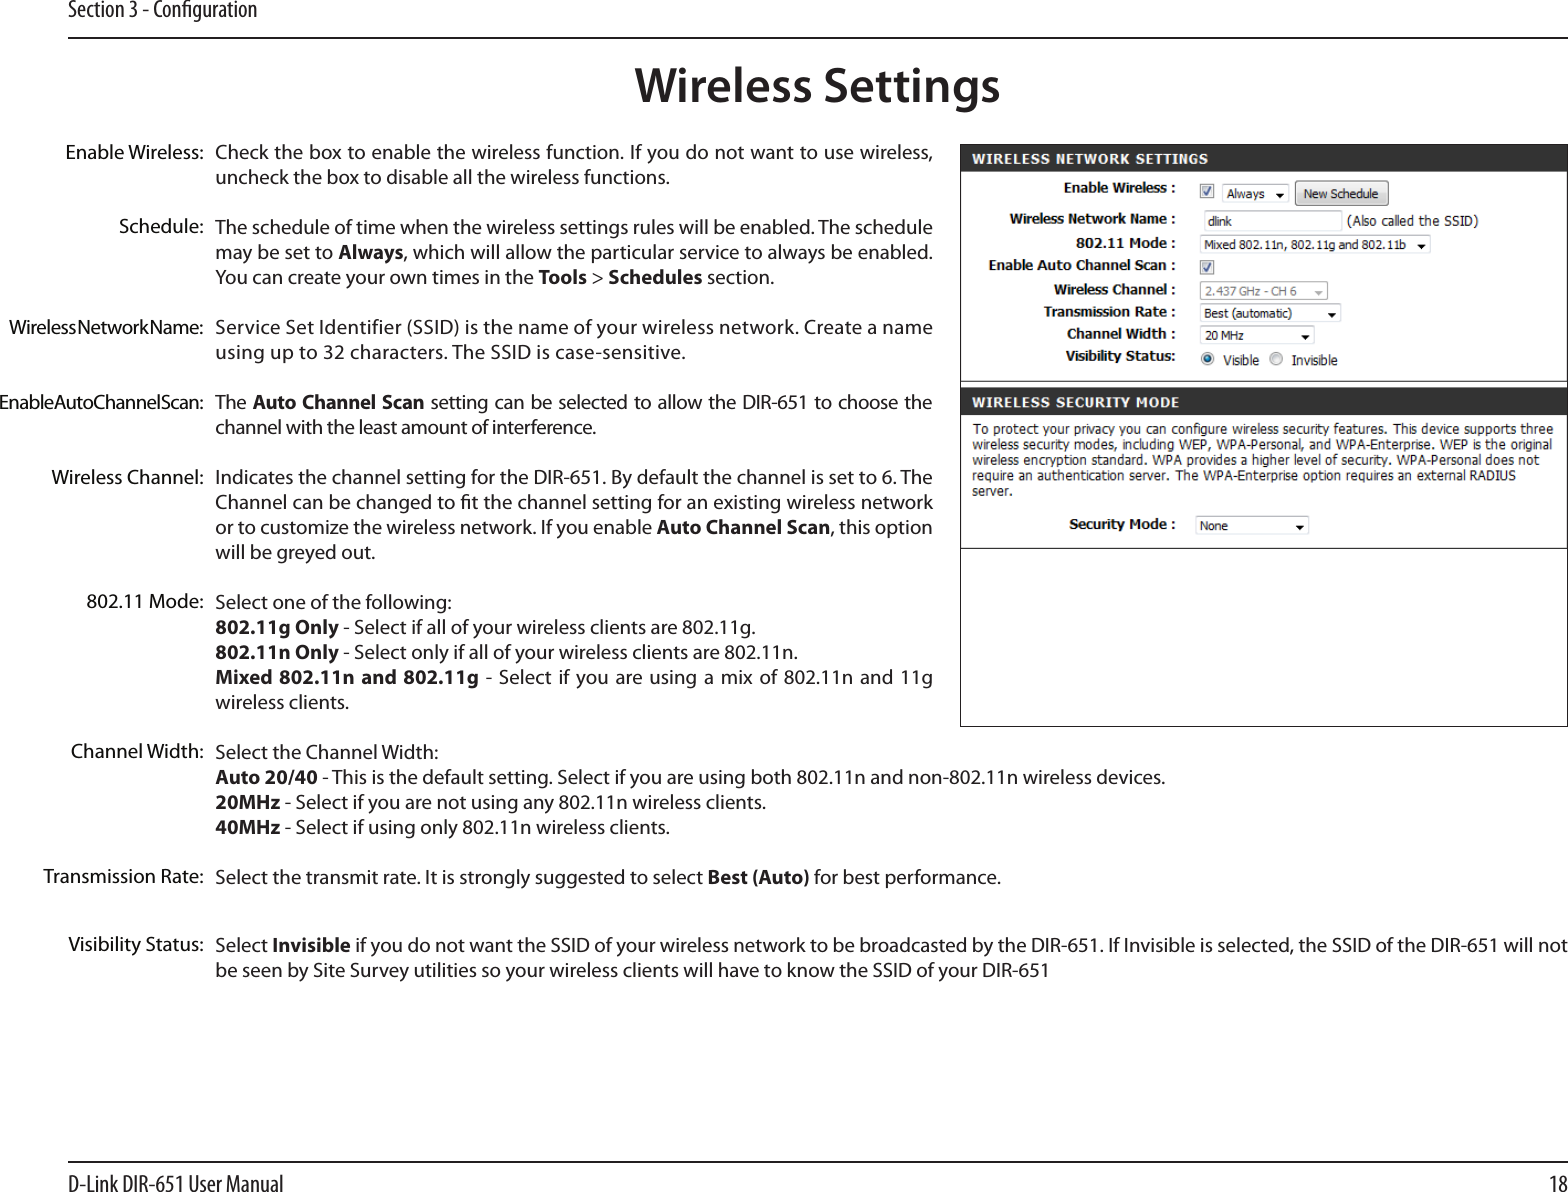 18D-Link DIR-651 User ManualSection 3 - CongurationCheck the box to enable the wireless function. If you do not want to use wireless, uncheck the box to disable all the wireless functions.The schedule of time when the wireless settings rules will be enabled. The schedule may be set to Always, which will allow the particular service to always be enabled. You can create your own times in the Tools &gt; Schedules section.Service Set Identifier (SSID) is the name of your wireless network. Create a name using up to 32 characters. The SSID is case-sensitive.The Auto Channel Scan setting  can  be selected to allow the DIR-651  to choose the channel with the least amount of interference.Indicates the channel setting for the DIR-651. By default the channel is set to 6. The Channel can be changed to t the channel setting for an existing wireless network or to customize the wireless network. If you enable Auto Channel Scan, this option will be greyed out.Select one of the following:802.11g Only - Select if all of your wireless clients are 802.11g.802.11n Only - Select only if all of your wireless clients are 802.11n.Mixed 802.11n and 802.11g -  Select if you are using a mix  of  802.11n and 11g wireless clients.Select the Channel Width:Auto 20/40 - This is the default setting. Select if you are using both 802.11n and non-802.11n wireless devices.20MHz - Select if you are not using any 802.11n wireless clients.40MHz - Select if using only 802.11n wireless clients.Select the transmit rate. It is strongly suggested to select Best (Auto) for best performance.Select Invisible if you do not want the SSID of your wireless network to be broadcasted by the DIR-651. If Invisible is selected, the SSID of the DIR-651 will not be seen by Site Survey utilities so your wireless clients will have to know the SSID of your DIR-651Enable Wireless:Enable Auto Channel Scan:Wireless SettingsWireless Network Name:Wireless Channel:802.11 Mode:Channel Width:Transmission Rate:Visibility Status:Schedule: